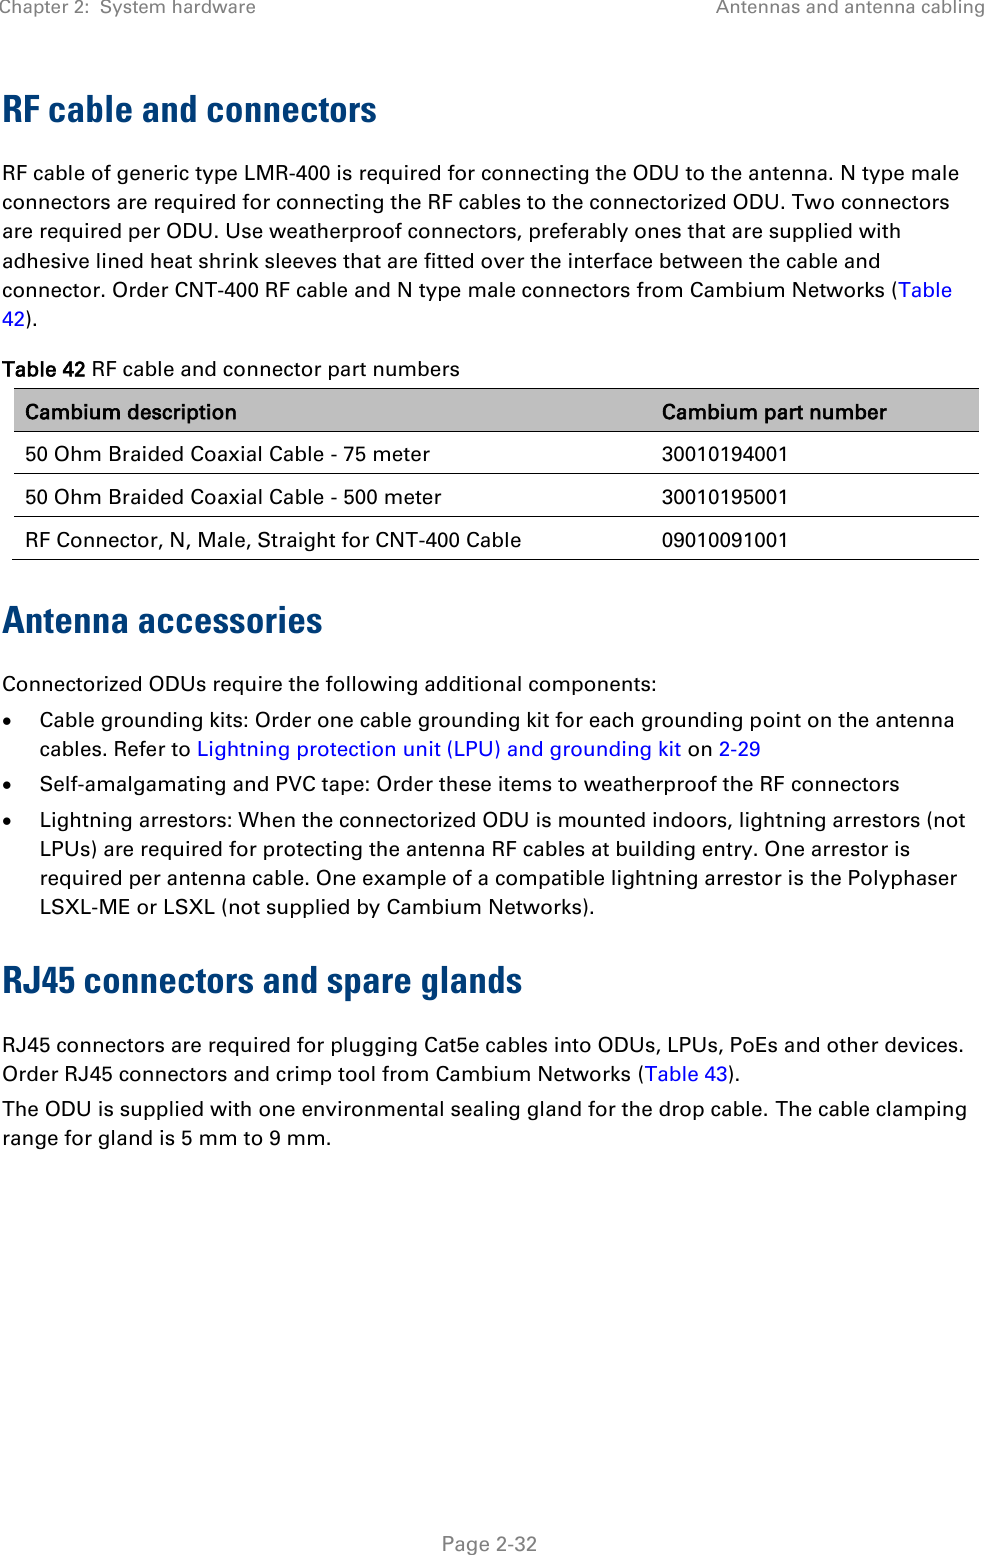 Chapter 2:  System hardware Antennas and antenna cabling   Page 2-32 RF cable and connectors RF cable of generic type LMR-400 is required for connecting the ODU to the antenna. N type male connectors are required for connecting the RF cables to the connectorized ODU. Two connectors are required per ODU. Use weatherproof connectors, preferably ones that are supplied with adhesive lined heat shrink sleeves that are fitted over the interface between the cable and connector. Order CNT-400 RF cable and N type male connectors from Cambium Networks (Table 42). Table 42 RF cable and connector part numbers Cambium description Cambium part number 50 Ohm Braided Coaxial Cable - 75 meter 30010194001 50 Ohm Braided Coaxial Cable - 500 meter 30010195001 RF Connector, N, Male, Straight for CNT-400 Cable 09010091001 Antenna accessories Connectorized ODUs require the following additional components:  Cable grounding kits: Order one cable grounding kit for each grounding point on the antenna cables. Refer to Lightning protection unit (LPU) and grounding kit on 2-29  Self-amalgamating and PVC tape: Order these items to weatherproof the RF connectors  Lightning arrestors: When the connectorized ODU is mounted indoors, lightning arrestors (not LPUs) are required for protecting the antenna RF cables at building entry. One arrestor is required per antenna cable. One example of a compatible lightning arrestor is the Polyphaser LSXL-ME or LSXL (not supplied by Cambium Networks). RJ45 connectors and spare glands RJ45 connectors are required for plugging Cat5e cables into ODUs, LPUs, PoEs and other devices. Order RJ45 connectors and crimp tool from Cambium Networks (Table 43). The ODU is supplied with one environmental sealing gland for the drop cable. The cable clamping range for gland is 5 mm to 9 mm.  